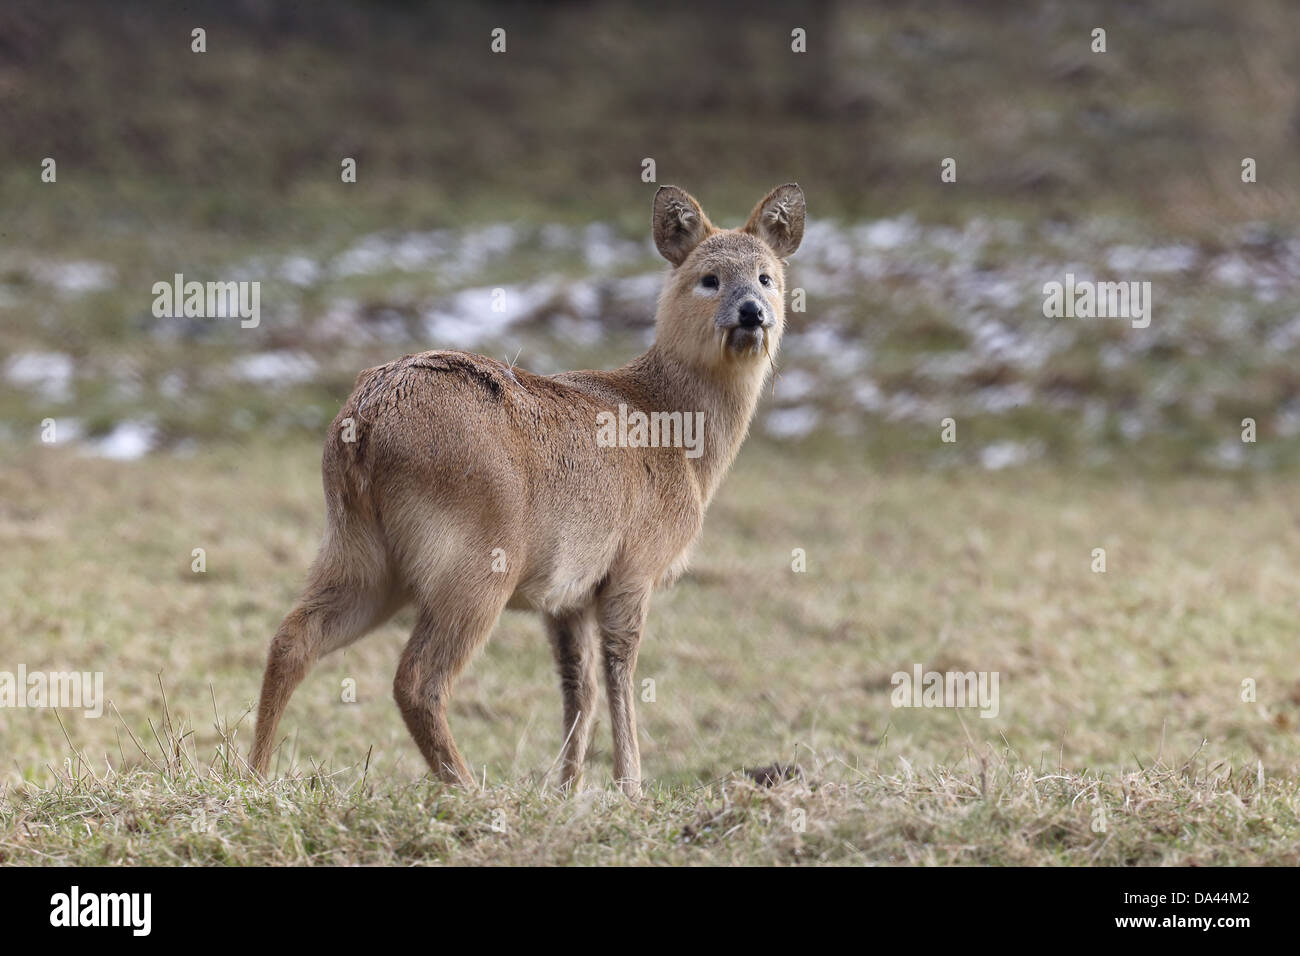 Chinese Water Deer (Hydropotes inermis) introduced species, adult male, standing on grass, Bedfordshire, England, February Stock Photo